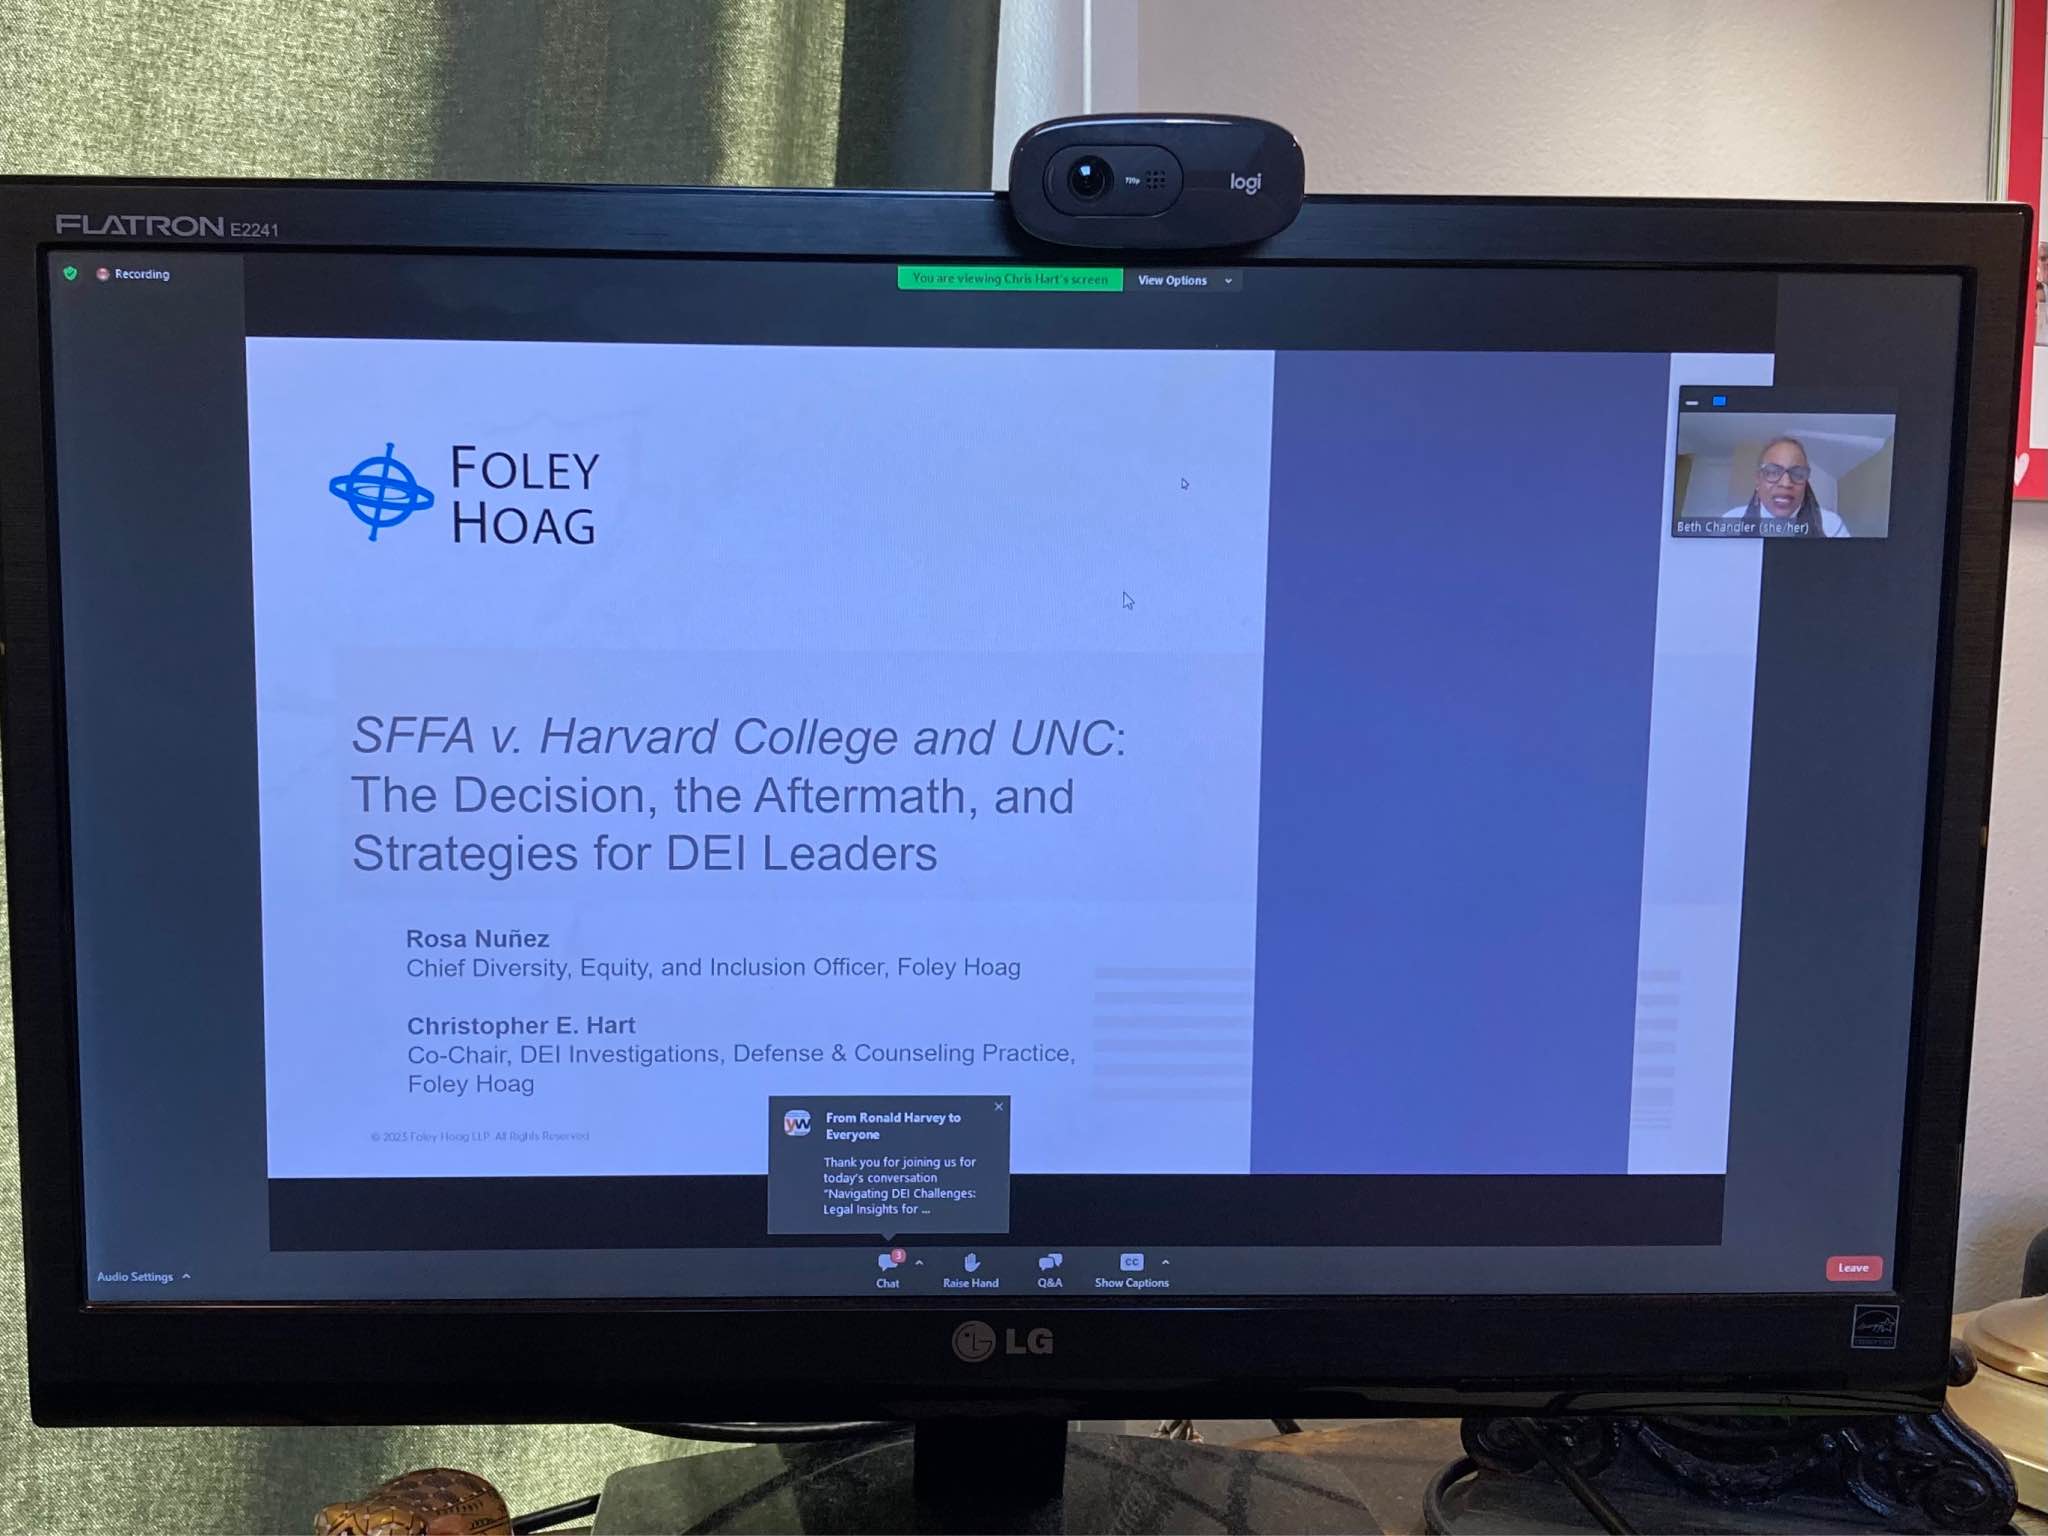 Photo of a computer screen showing a powerpoint slide. It's a cover slide showing the name of the law firm (Foley Hoag) and the presenters on the topic of "SFFA v. Harvard College and UNC: The Decision, the Aftermath, and Strategies for DEI Leaders."